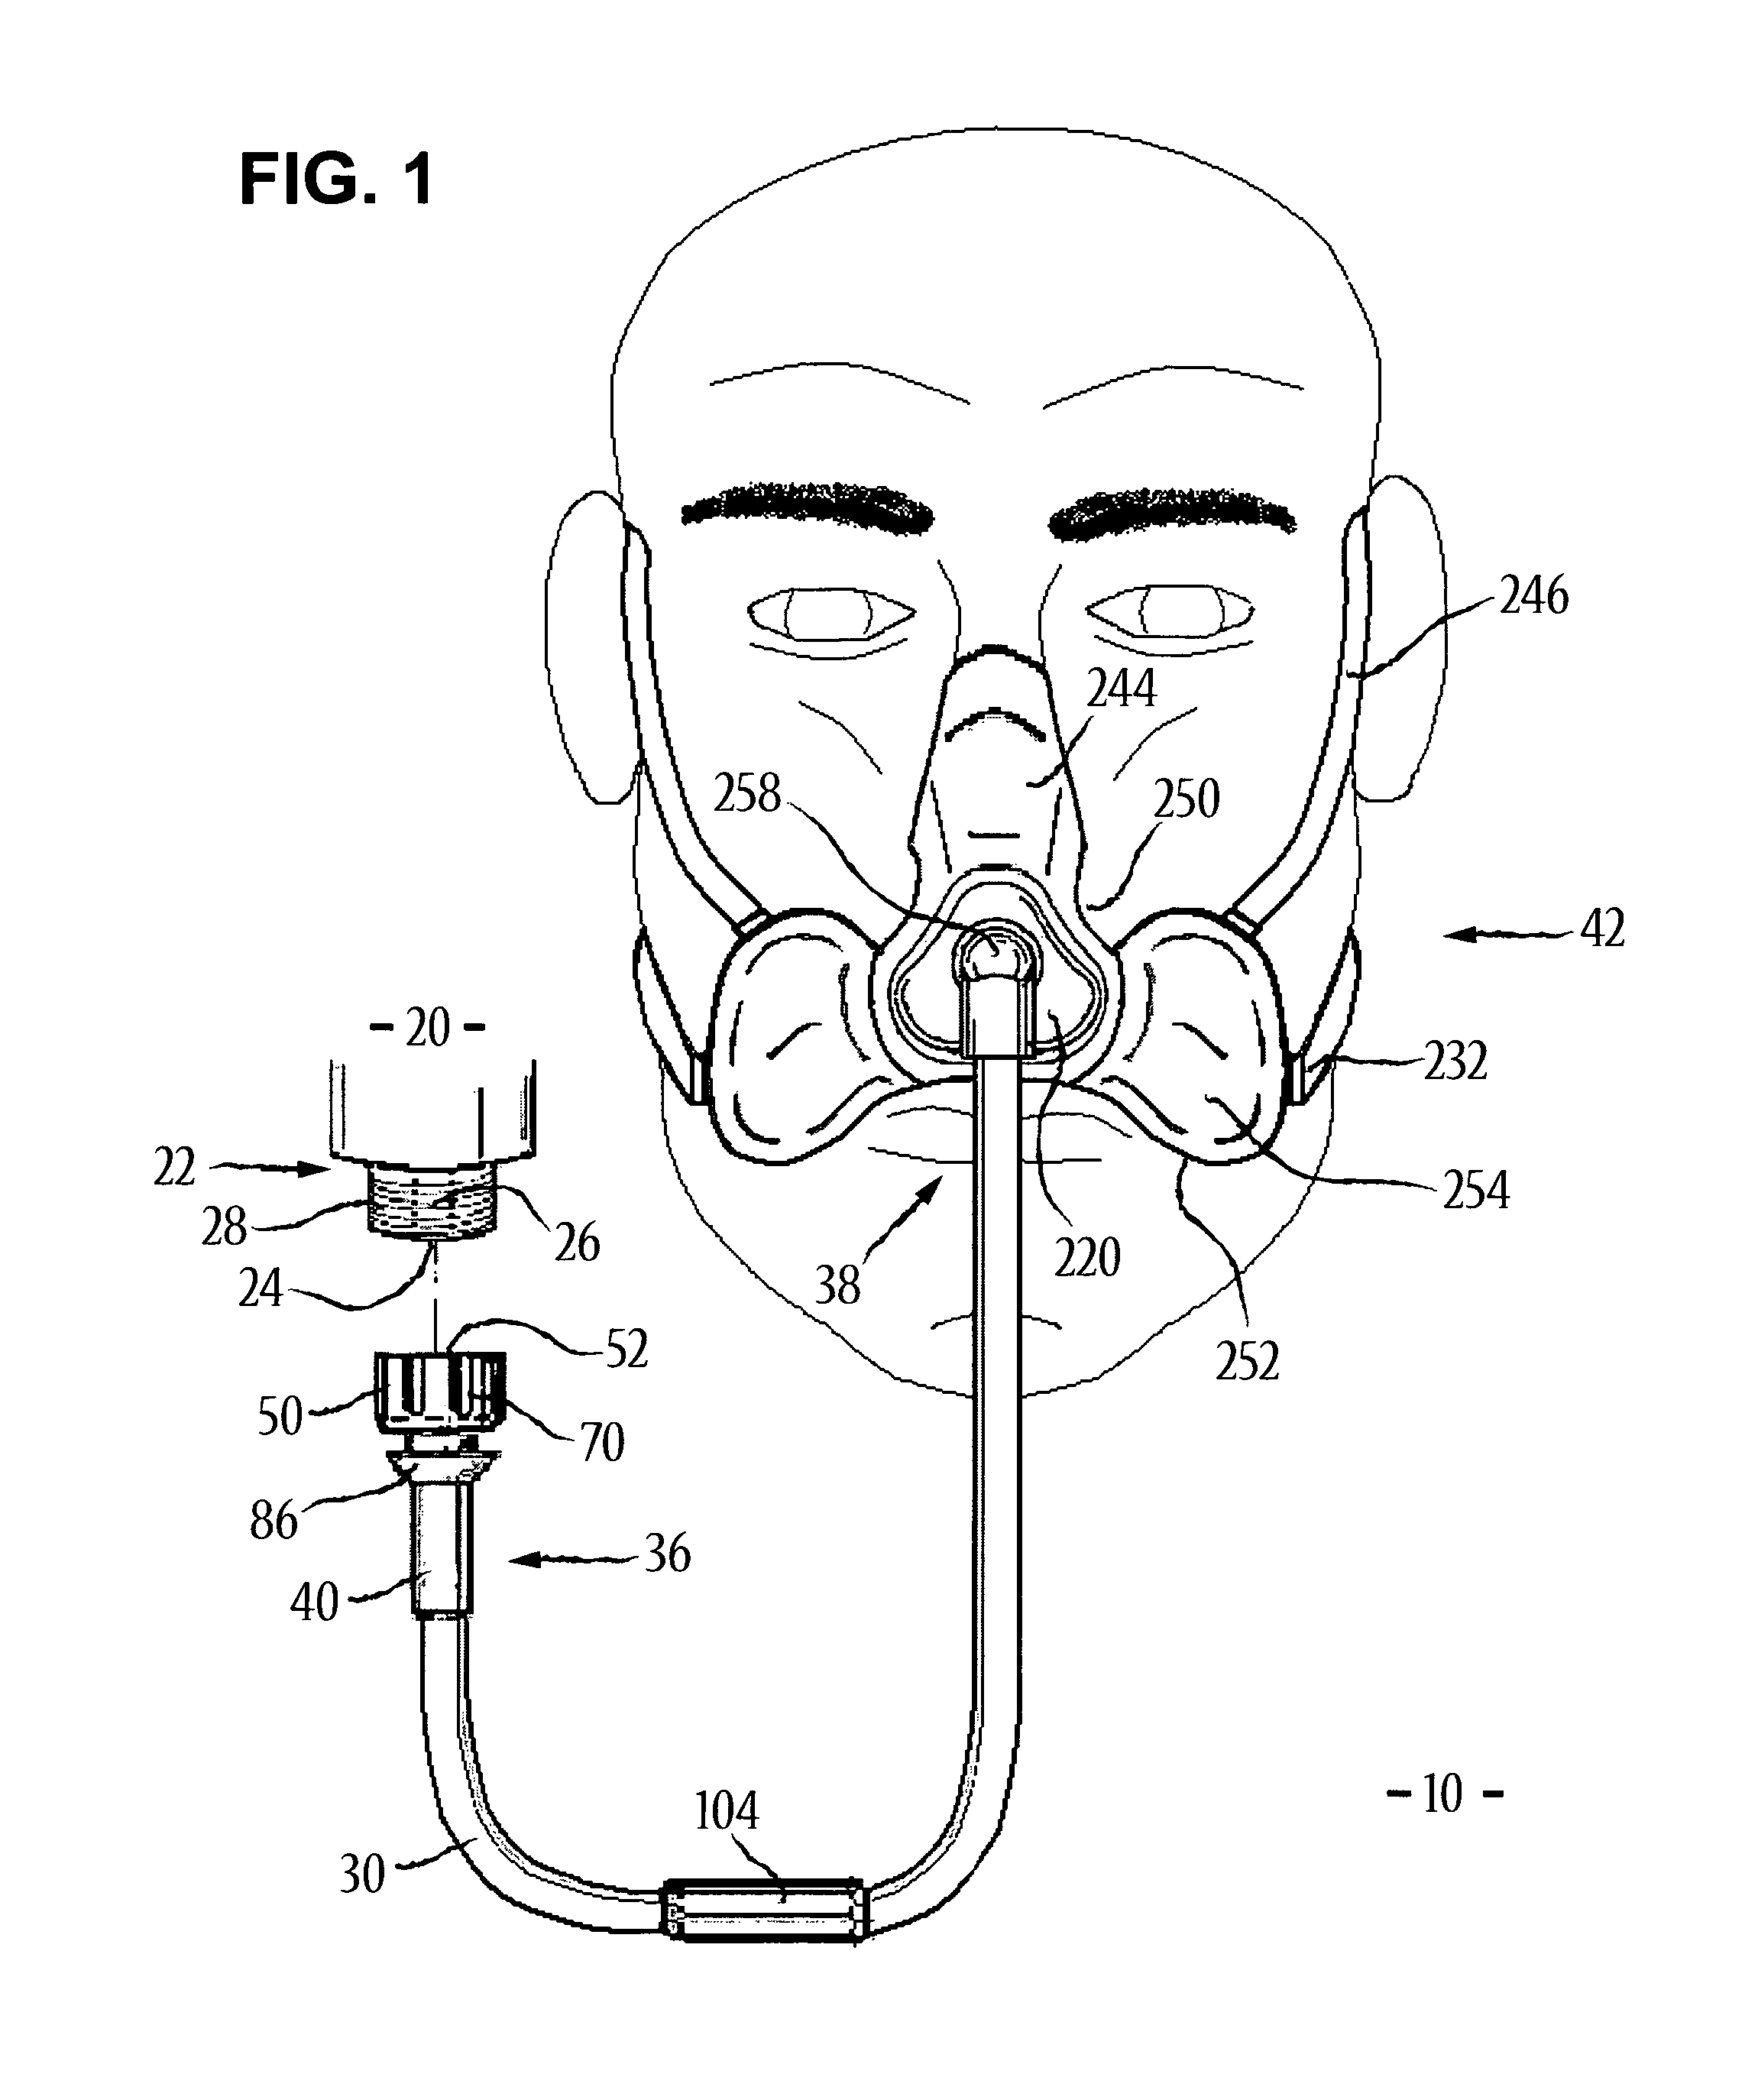 Universal medical gas delivery system